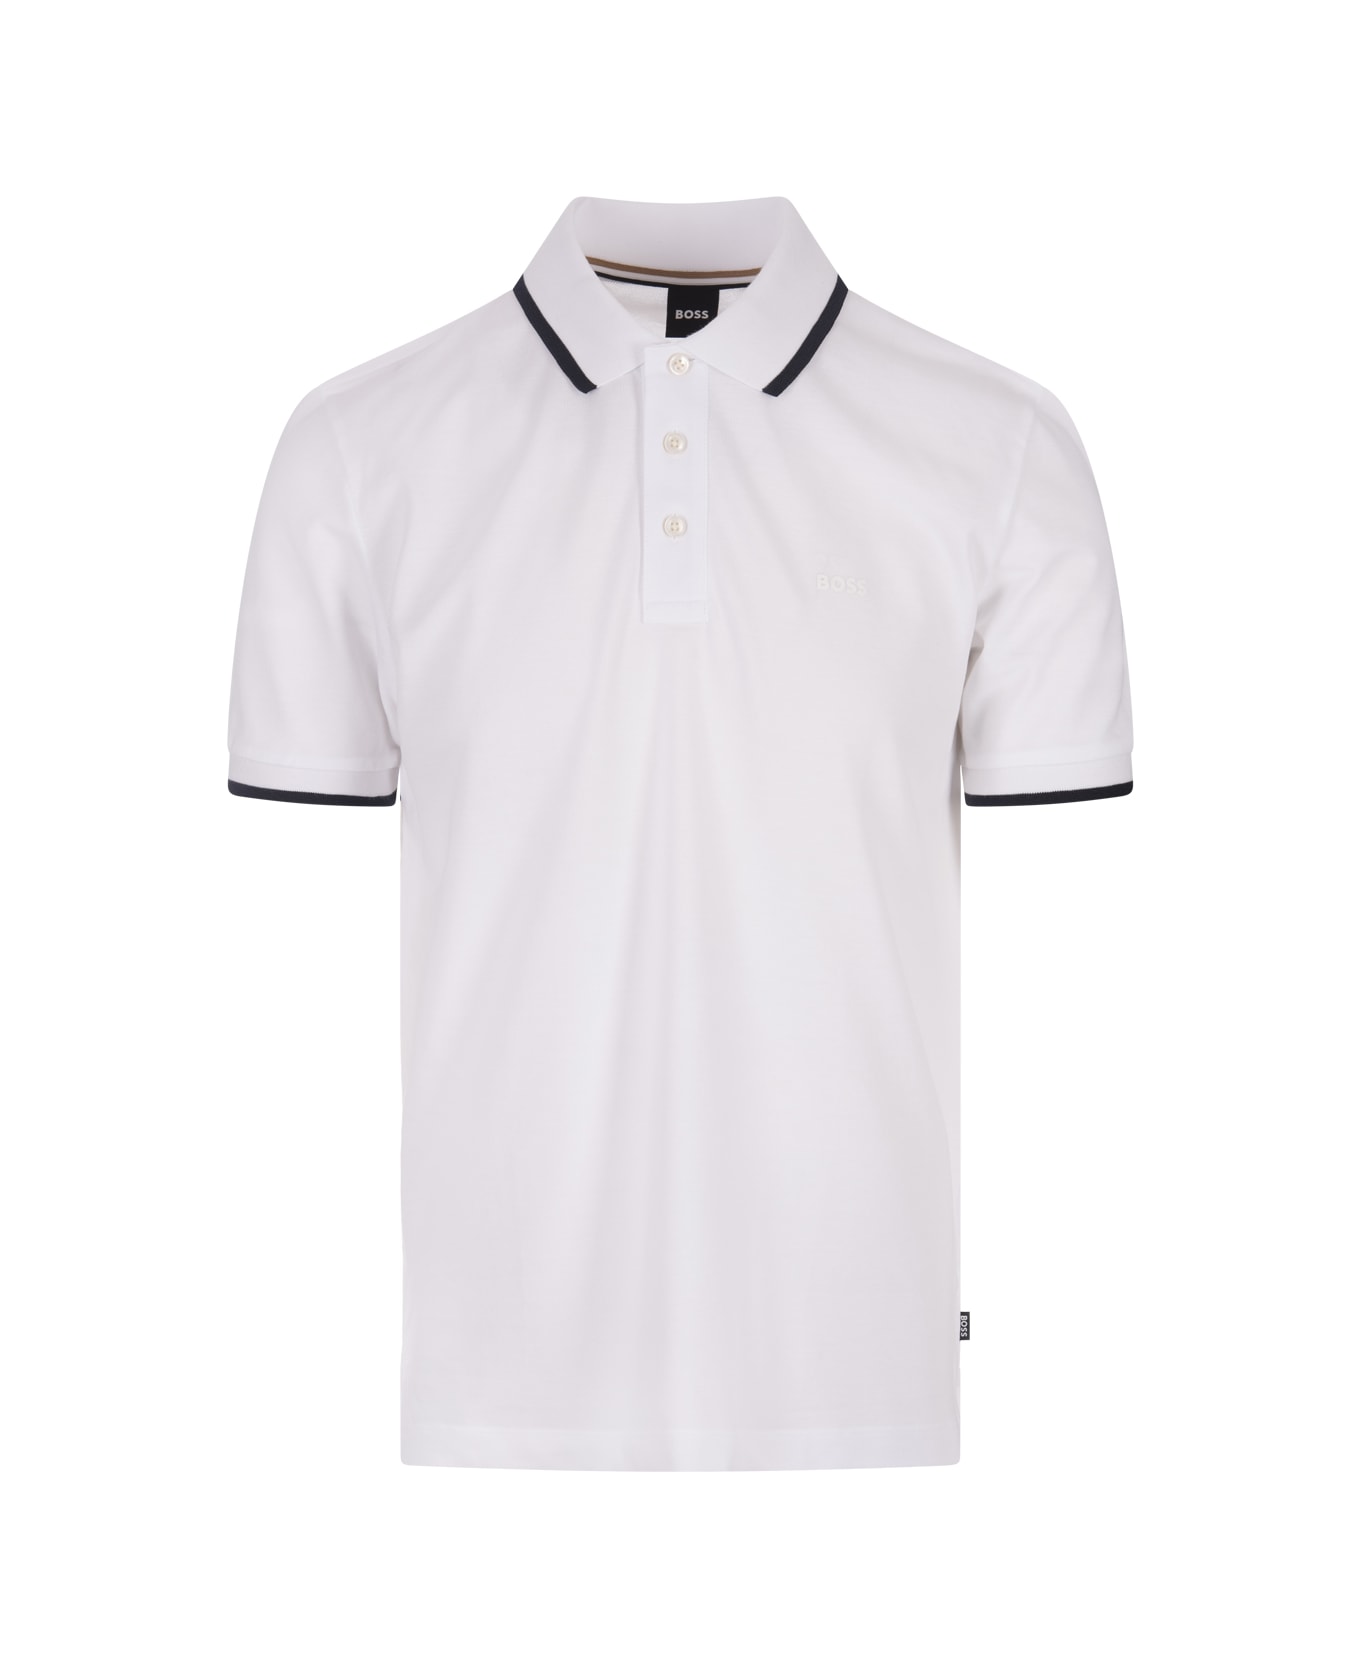 Hugo Boss White Slim Fit Polo Shirt With Striped Collar - Natural